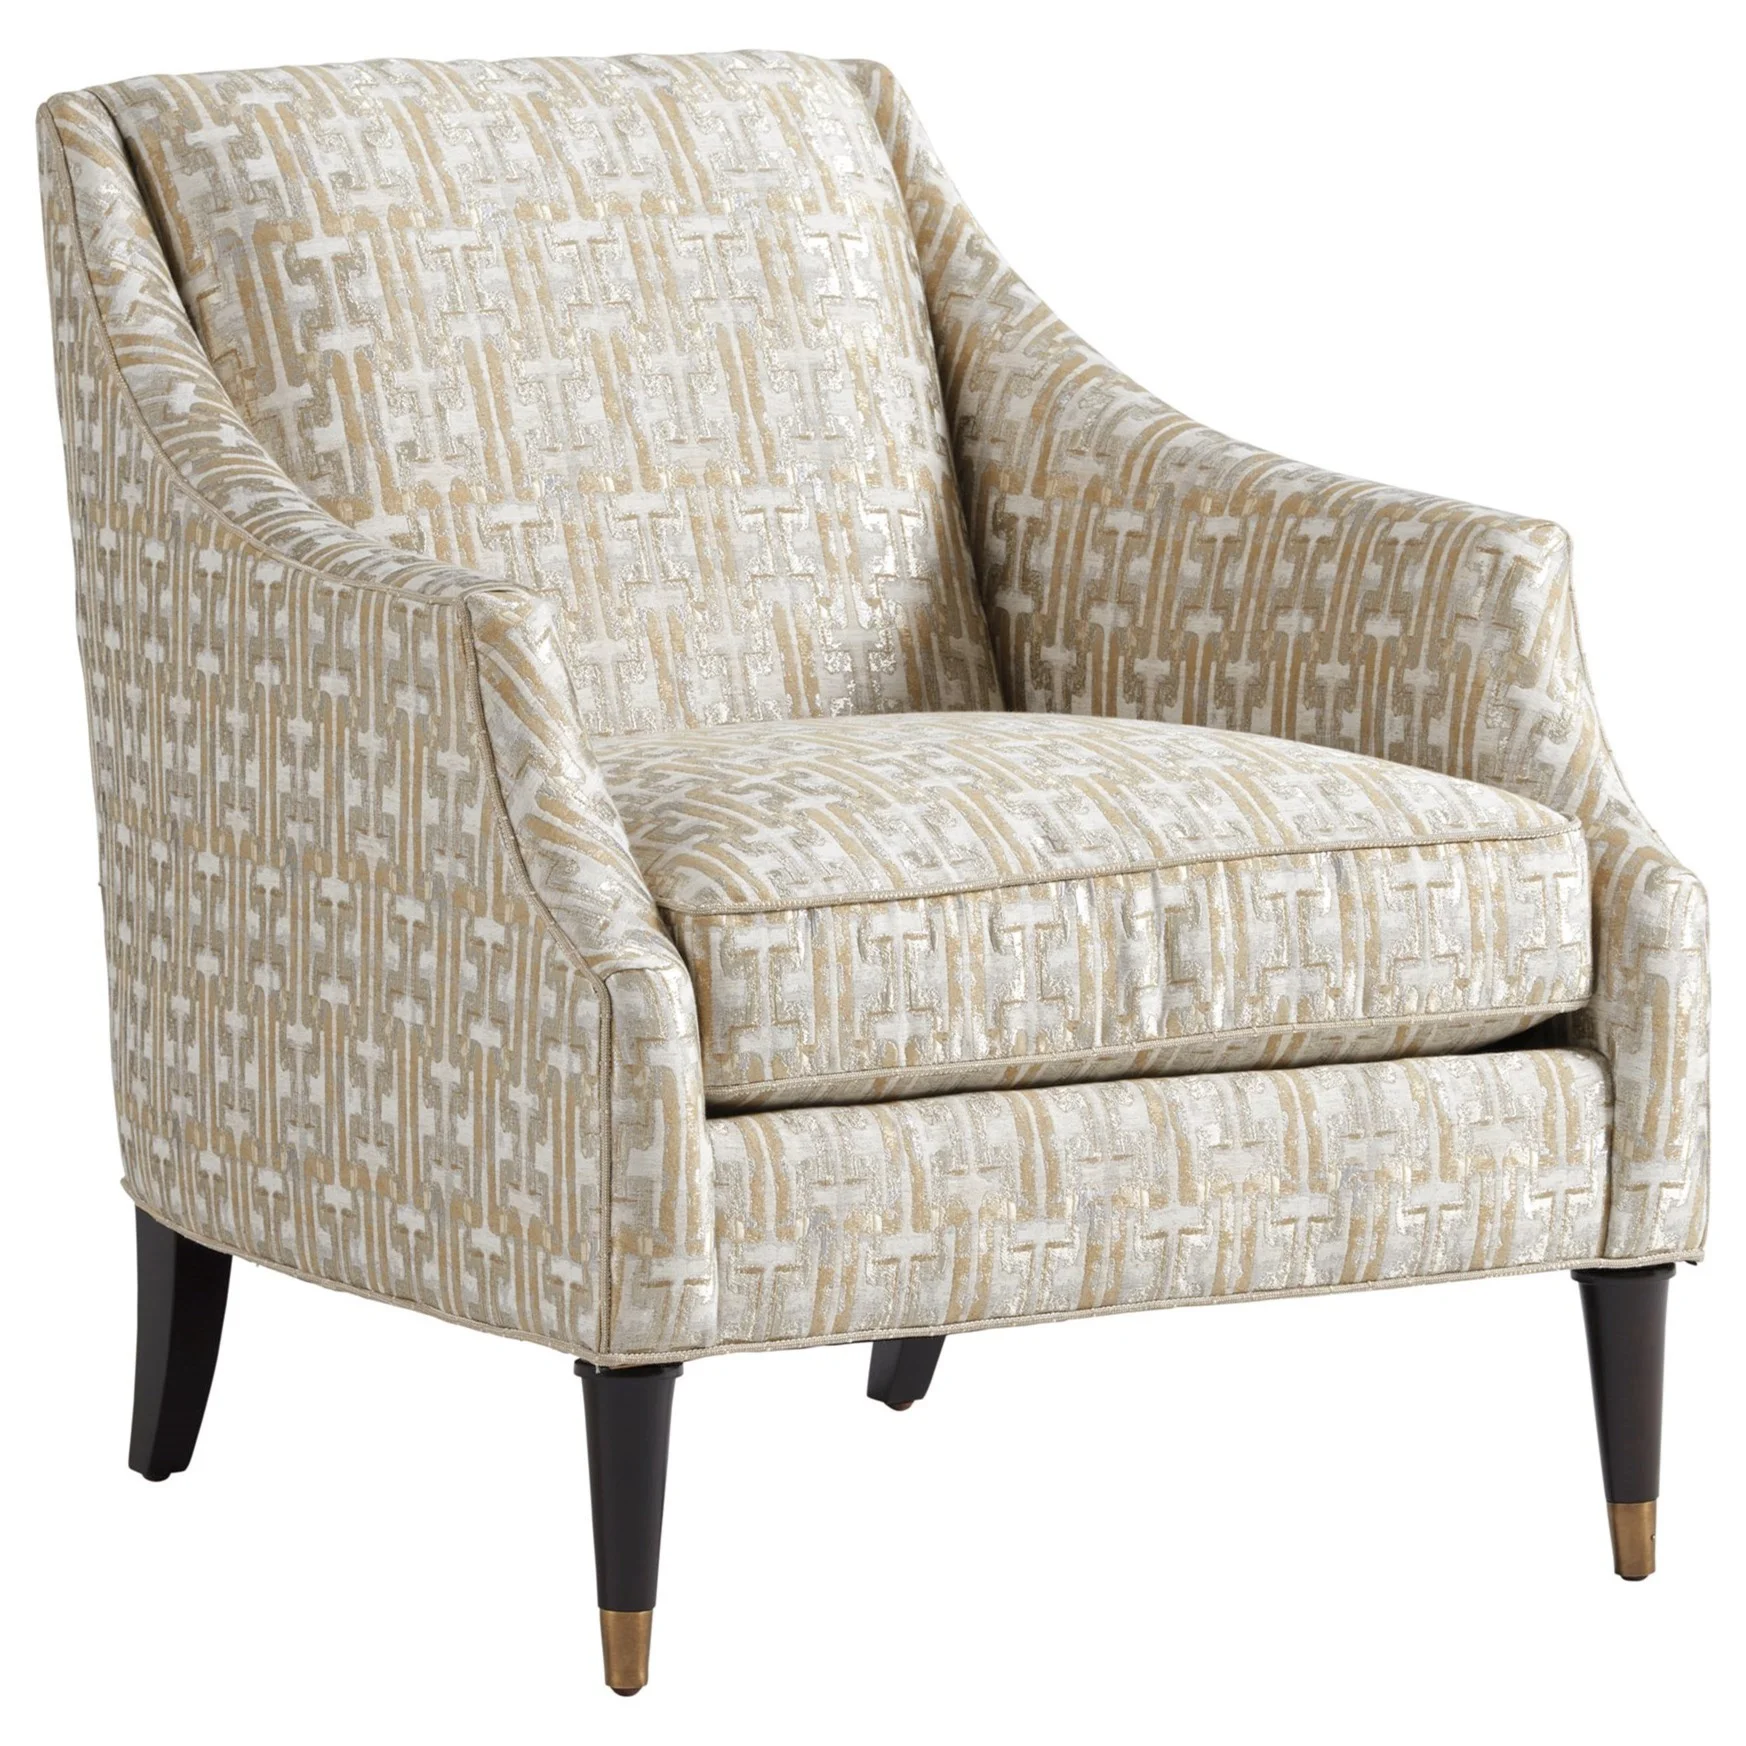 Lexington Carlyle 7573-11 Kerney Chair with Satin Gold Ferrules | Baer ...